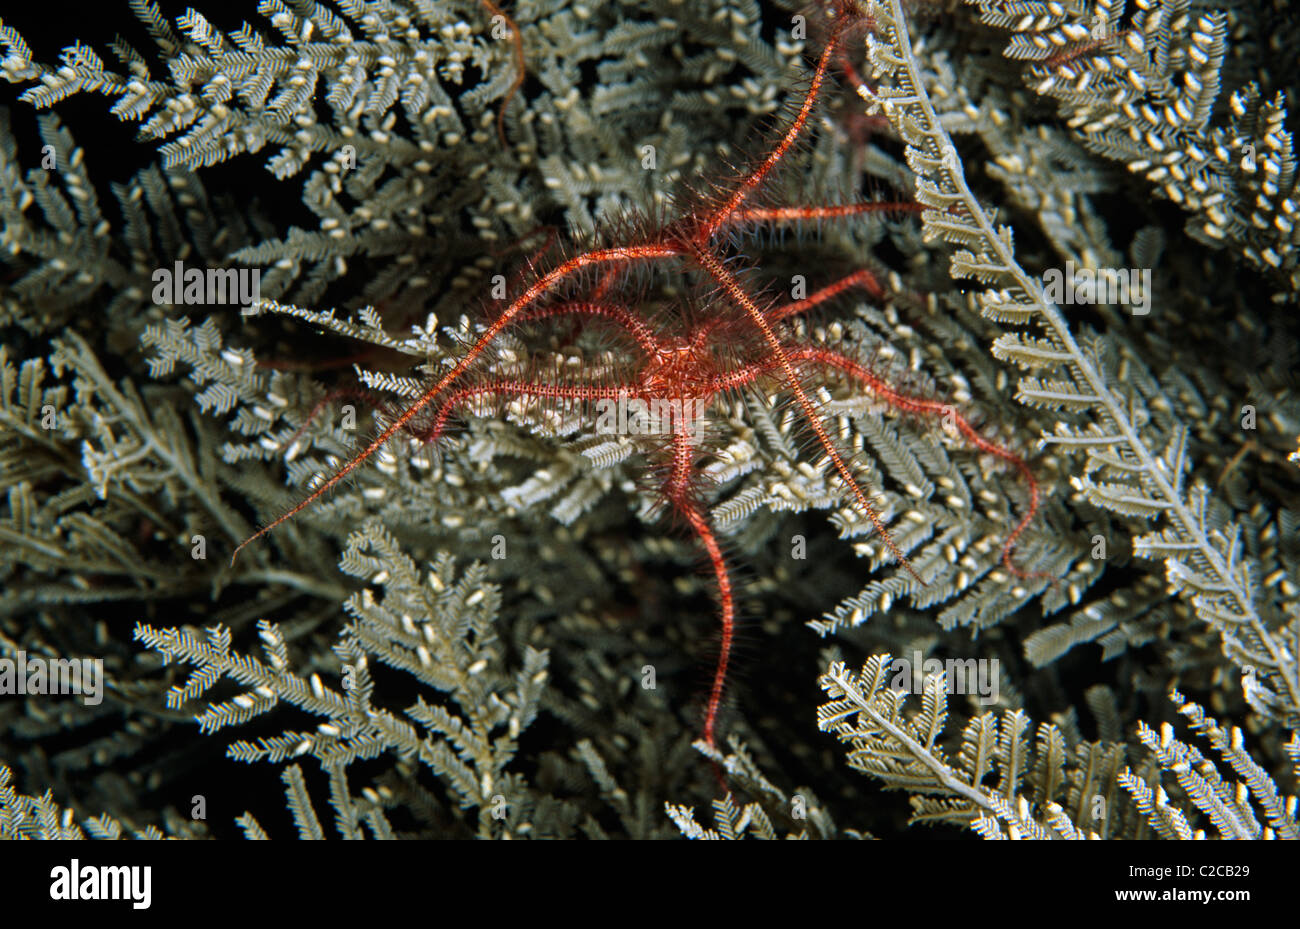 Brittle star, Ophiothrix sp, on Hydroid, Hydrozoa Class, Manado, Sulawesi, Indonesia, Asia Stock Photo